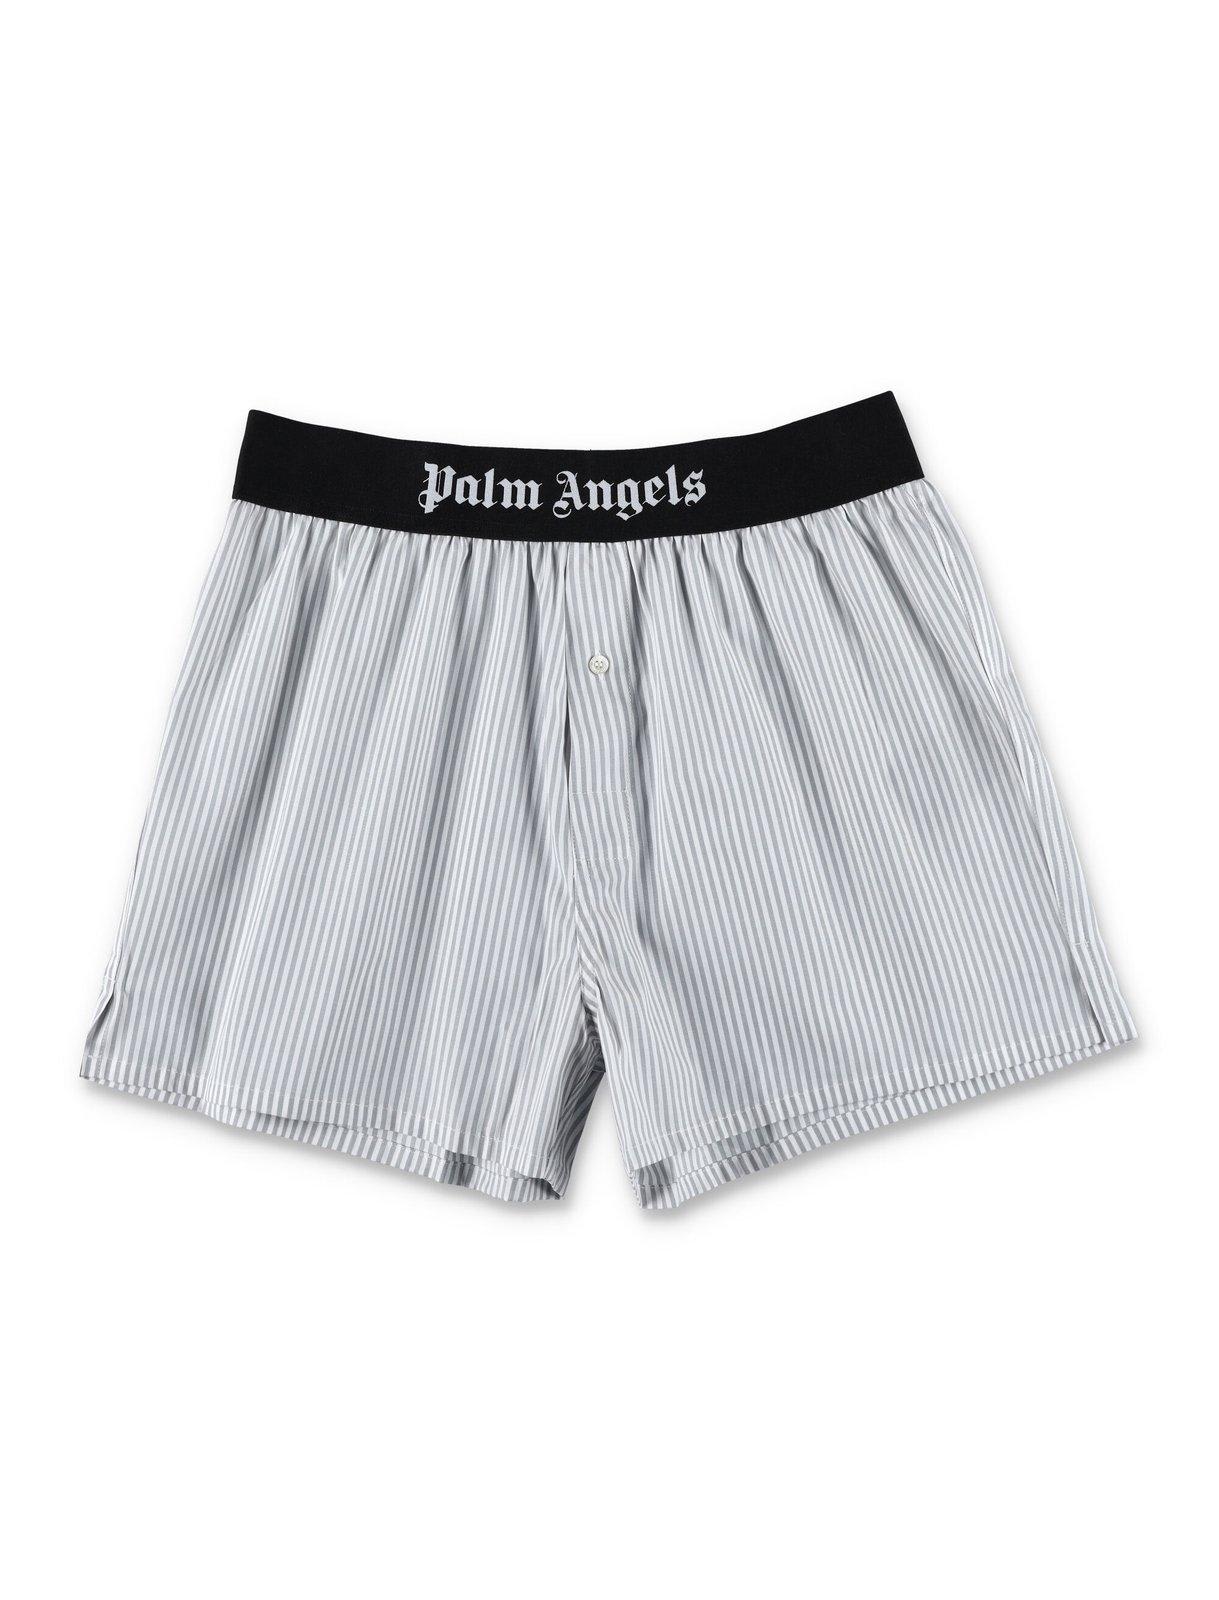 PALM ANGELS CLASSIC LOGO STRIPED BOXER